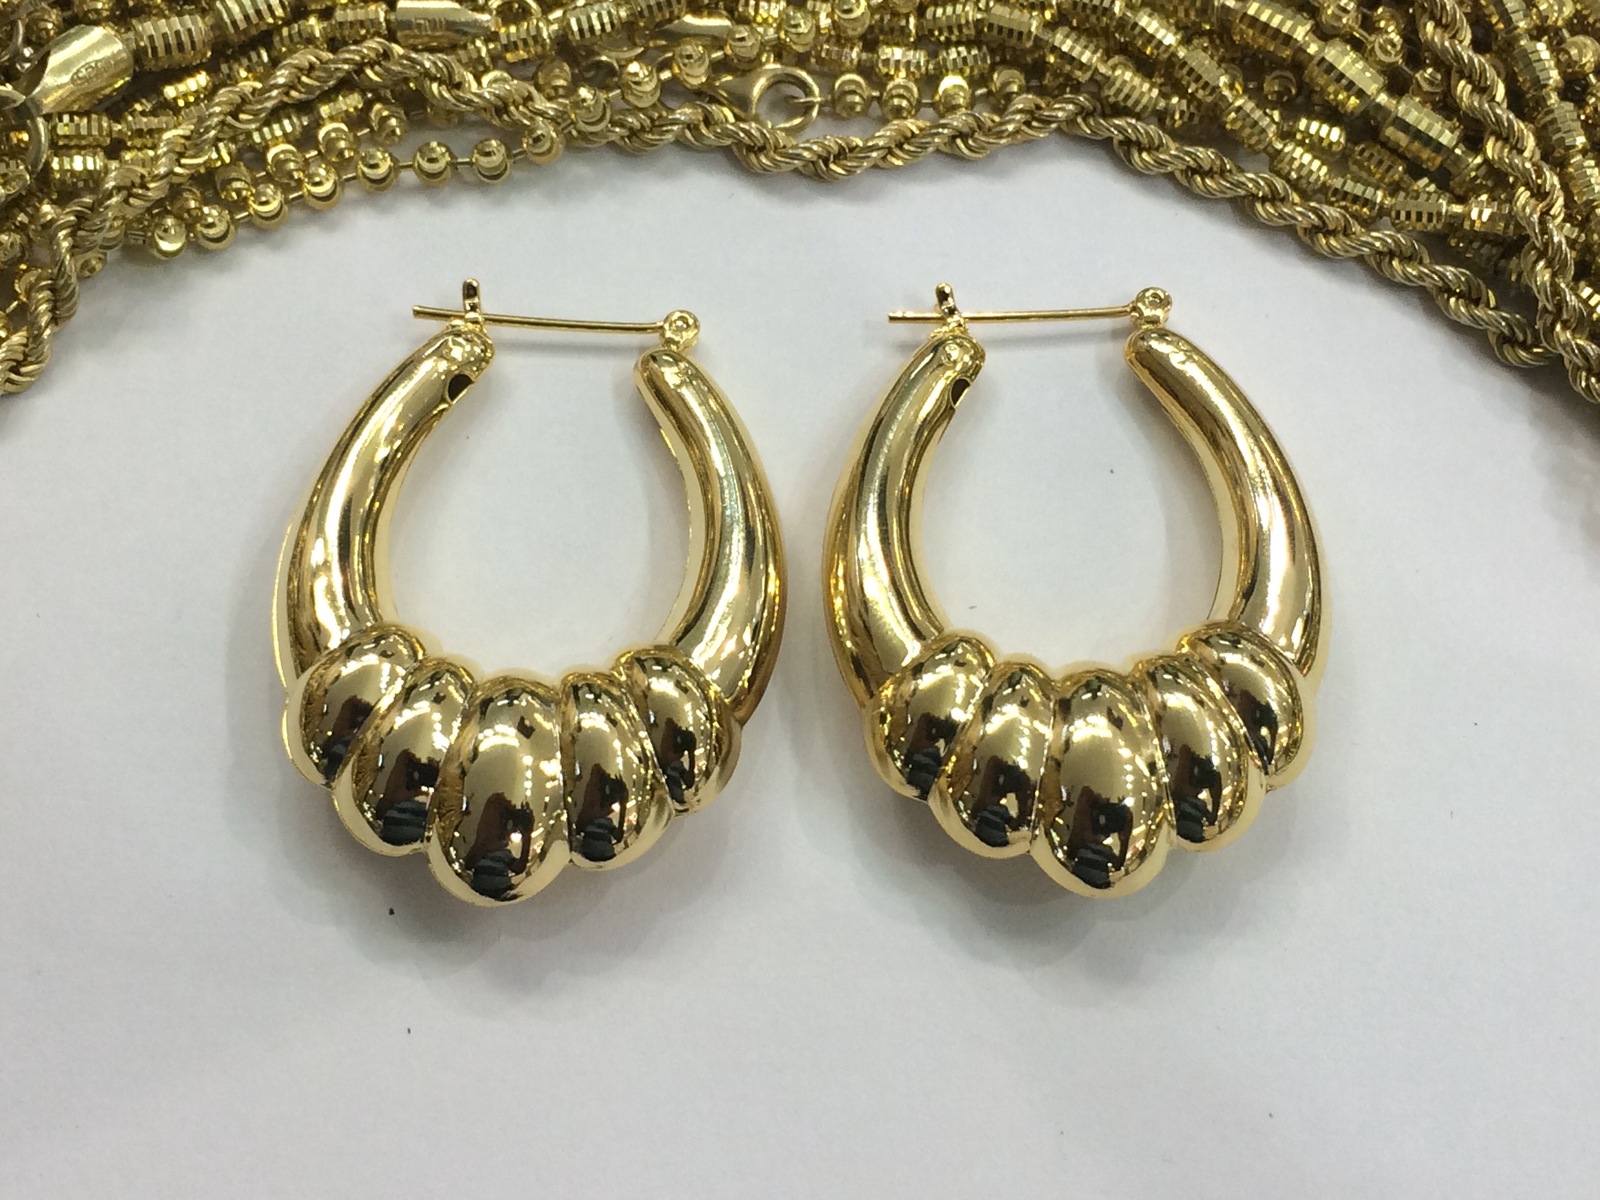 Primary image for 14k Gold Overlay Hoop Earrings 1 1/2 inches #a1